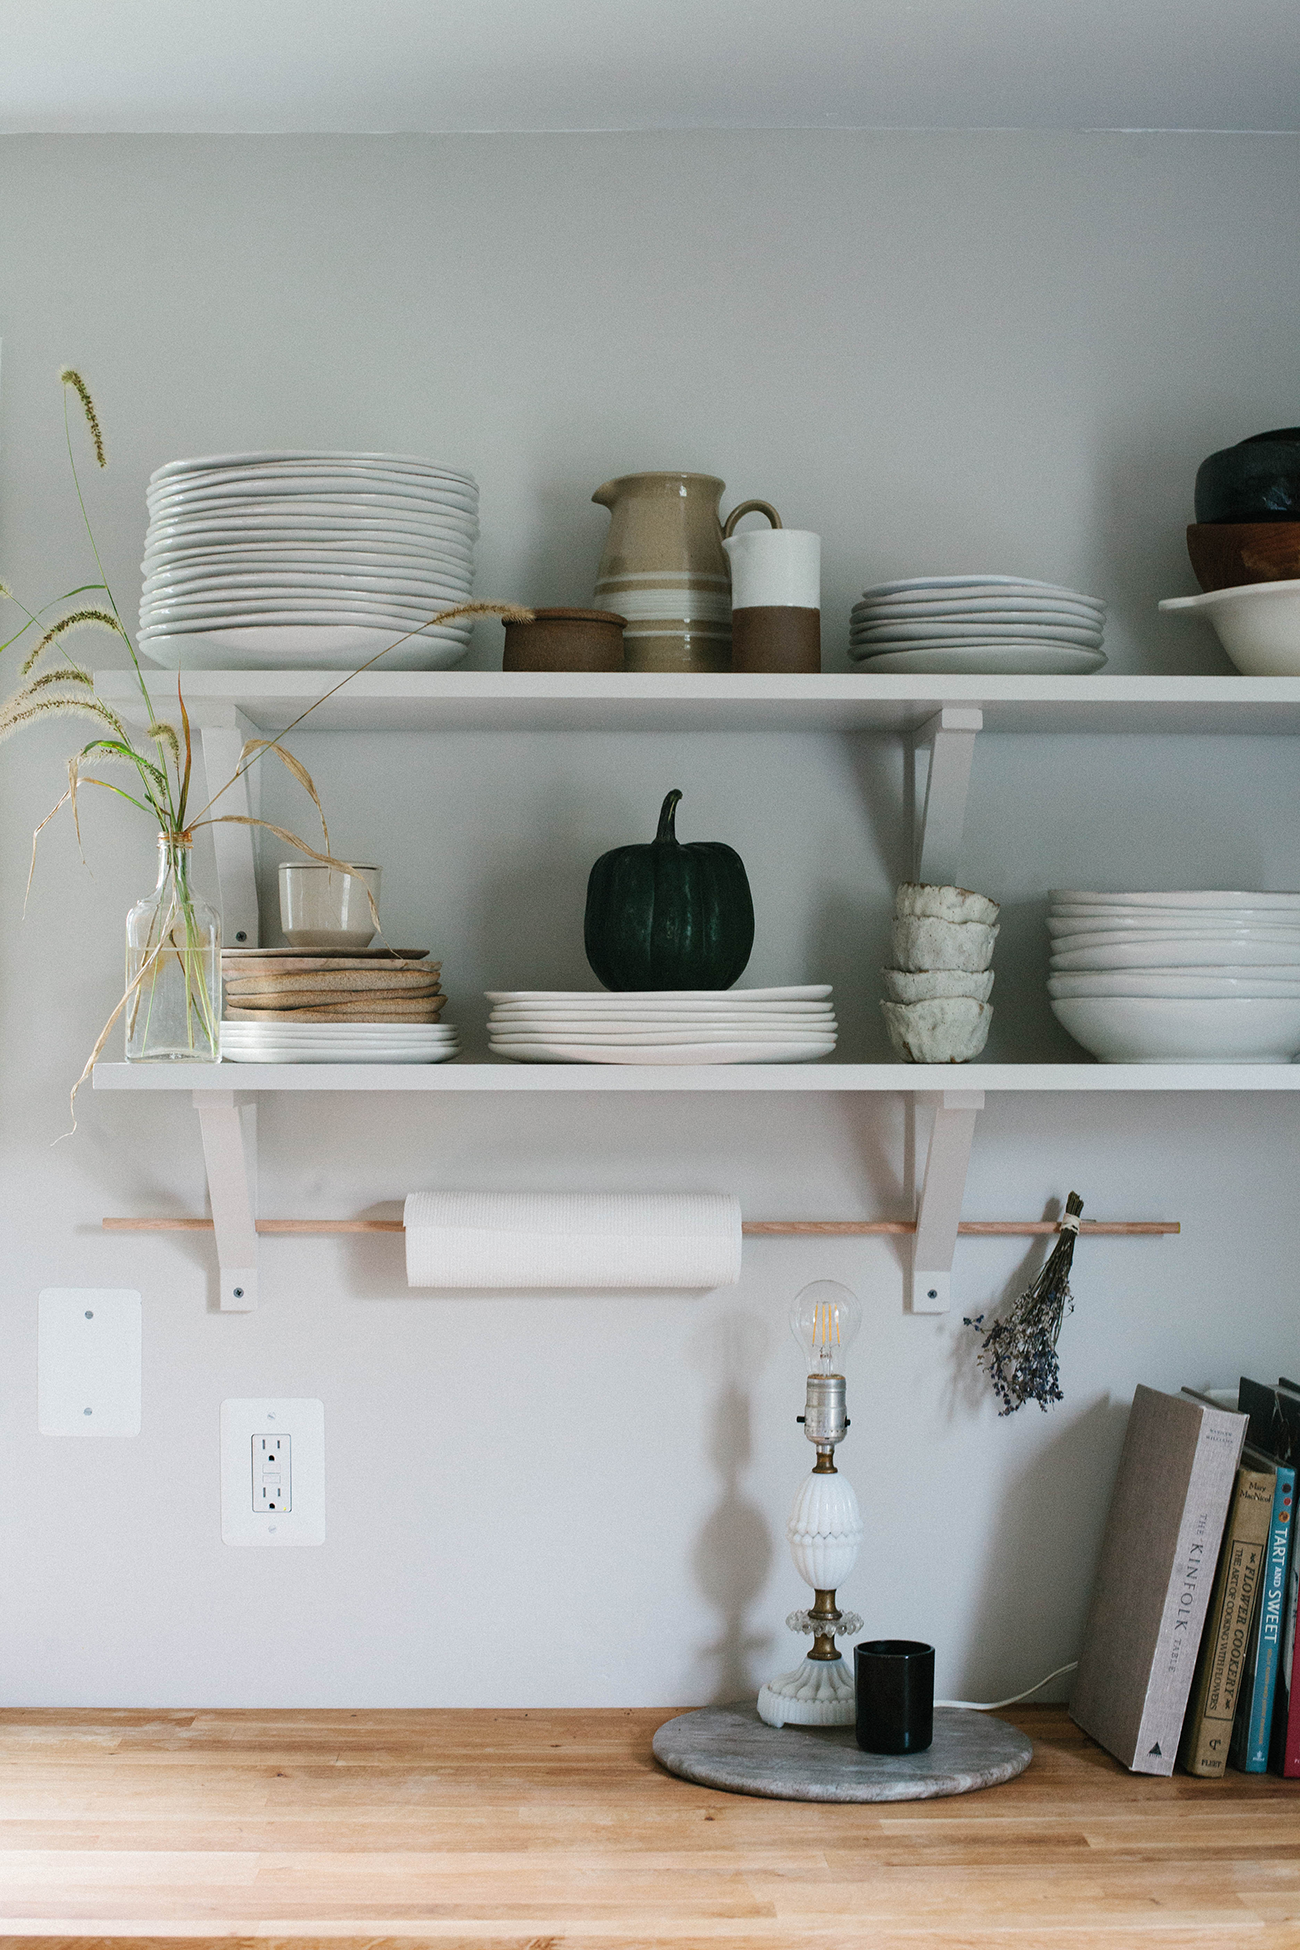 How To Style Open Kitchen Shelves for Autumn - A Daily Something